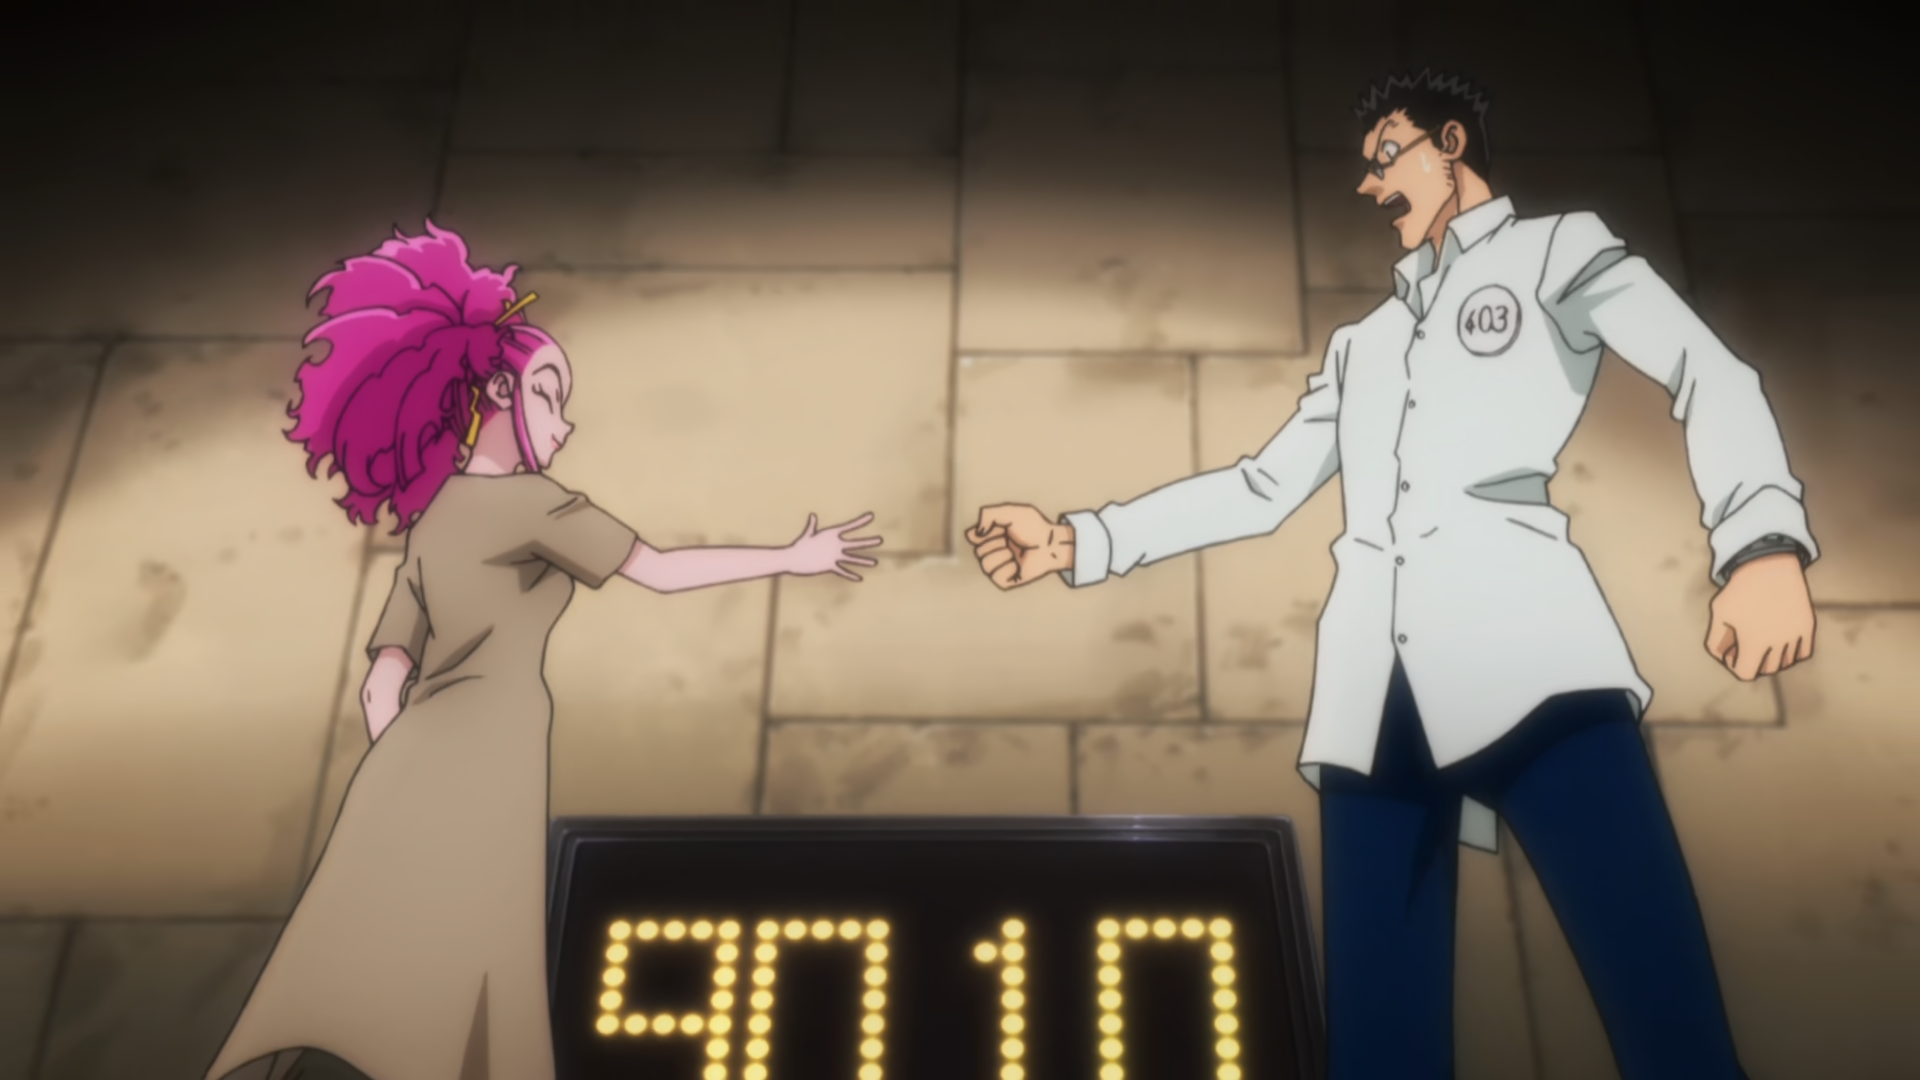 Watch Hunter X Hunter Season 1 Episode 11 - Trouble x With The x Gamble  Online Now